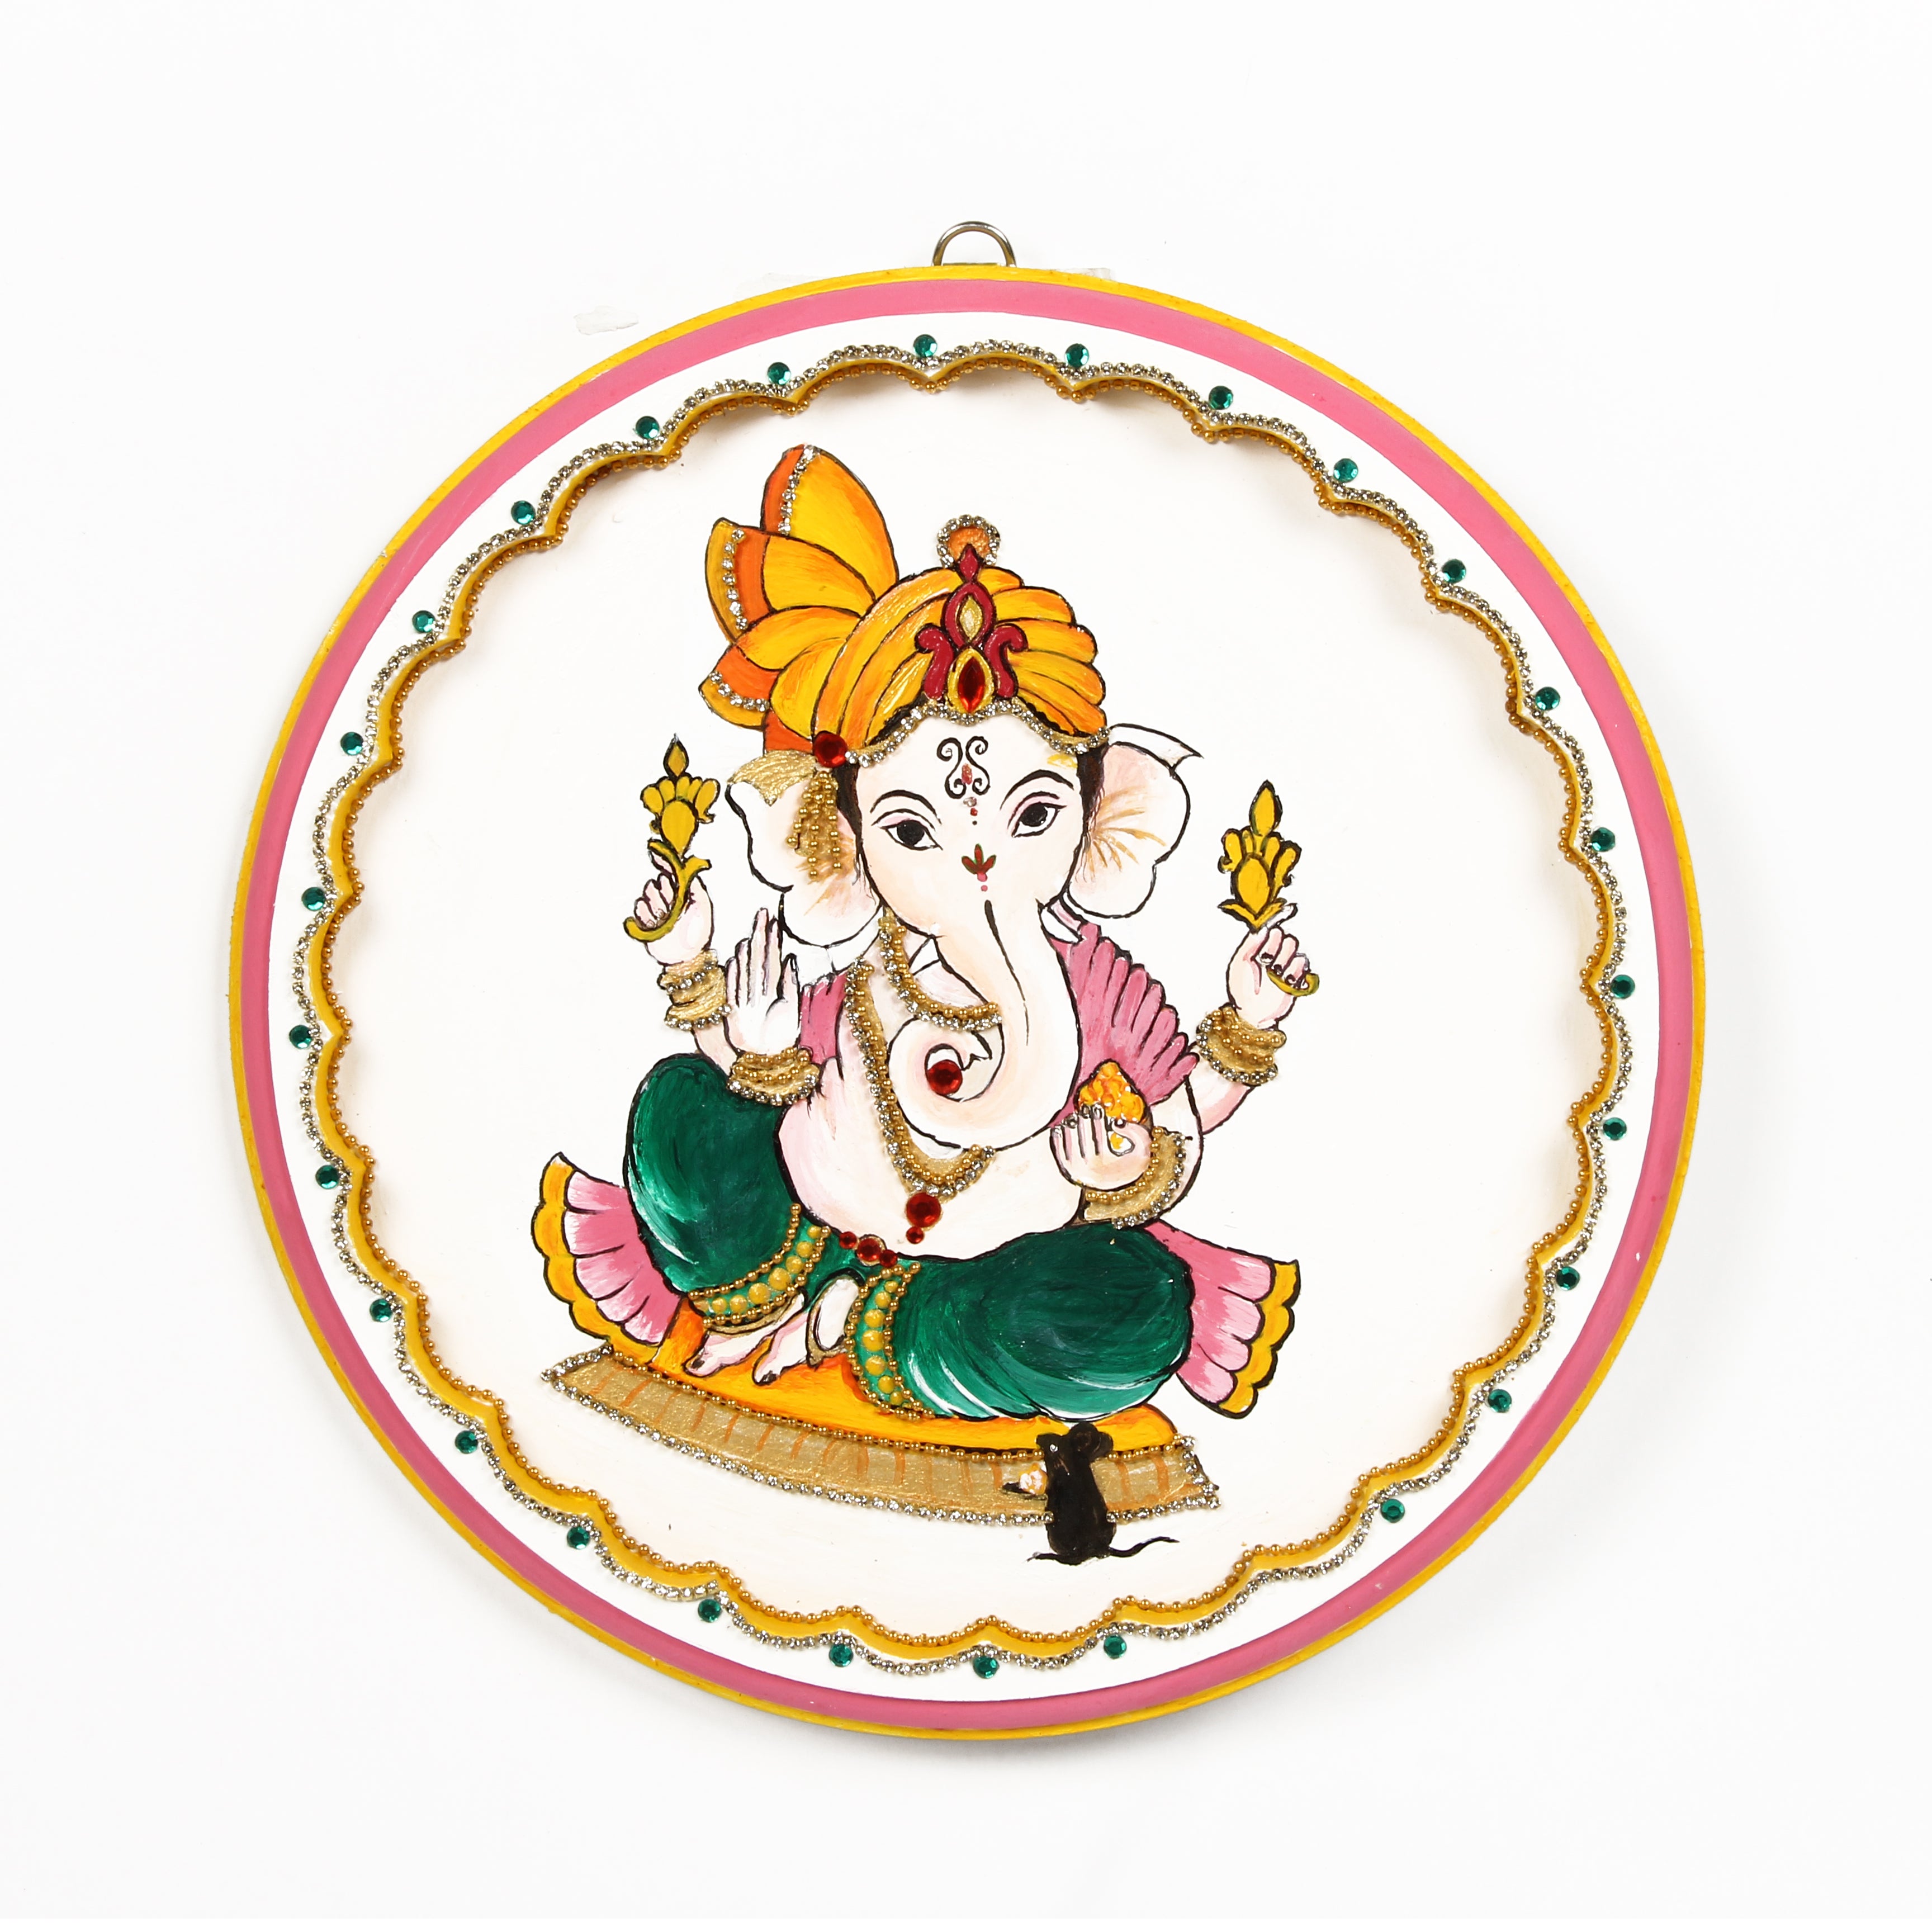 Mdf Pre Marked Charming Ganesha With D Ring Hanging Hook 6Inch Dia 1Pc Lb